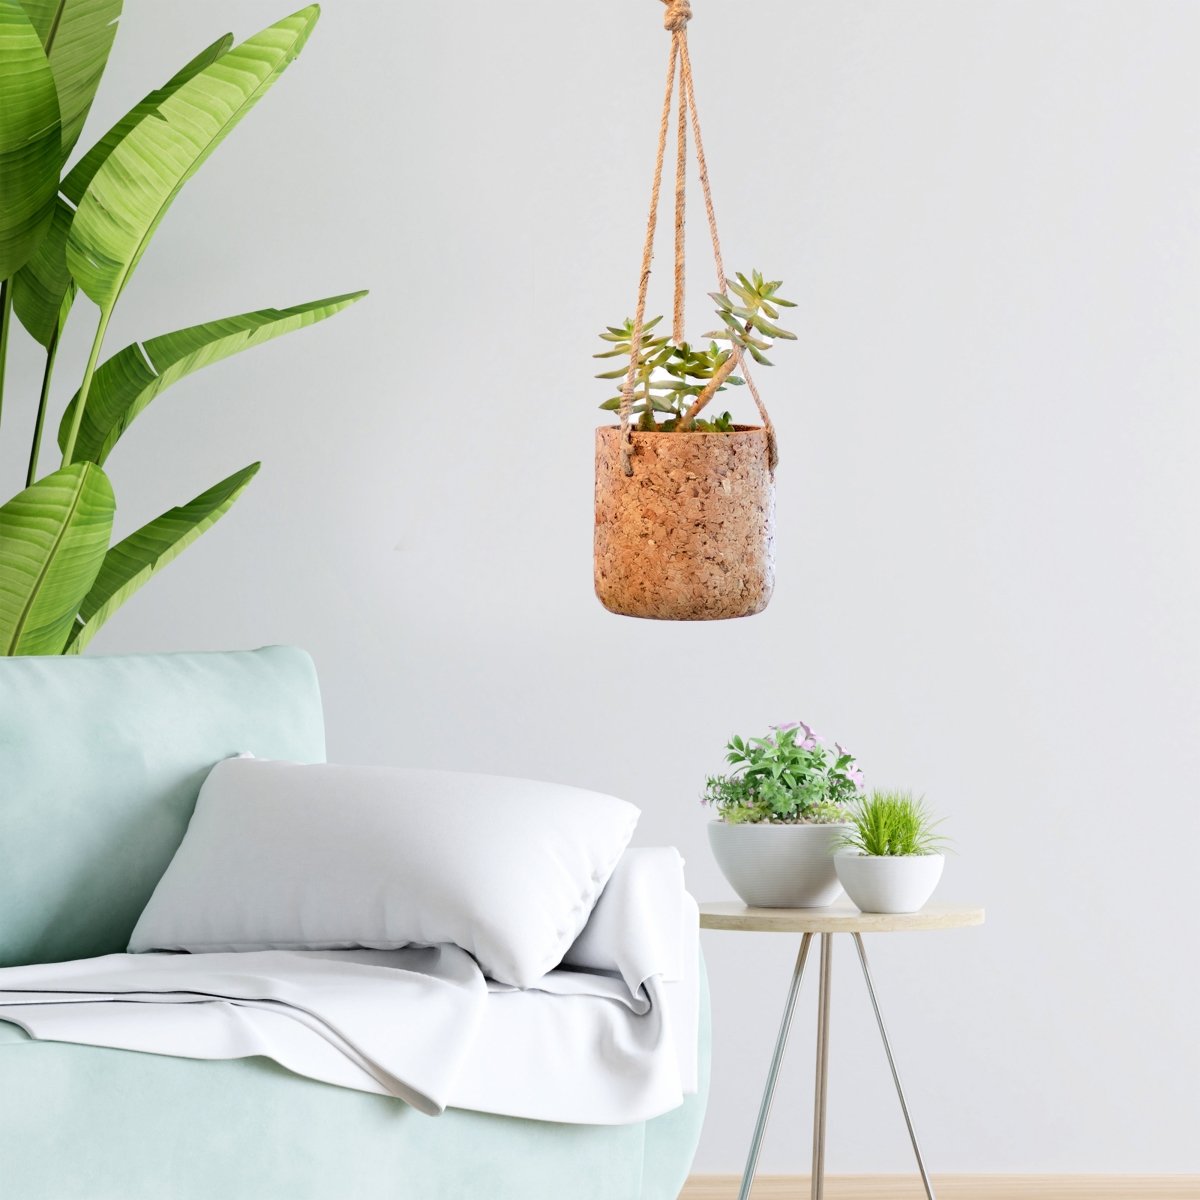 Kezevel Cork Decorative Hanging Planter - Natural Cork Cylindrical Hanging Planters Pot with Jute Twine Rope for Home Decor